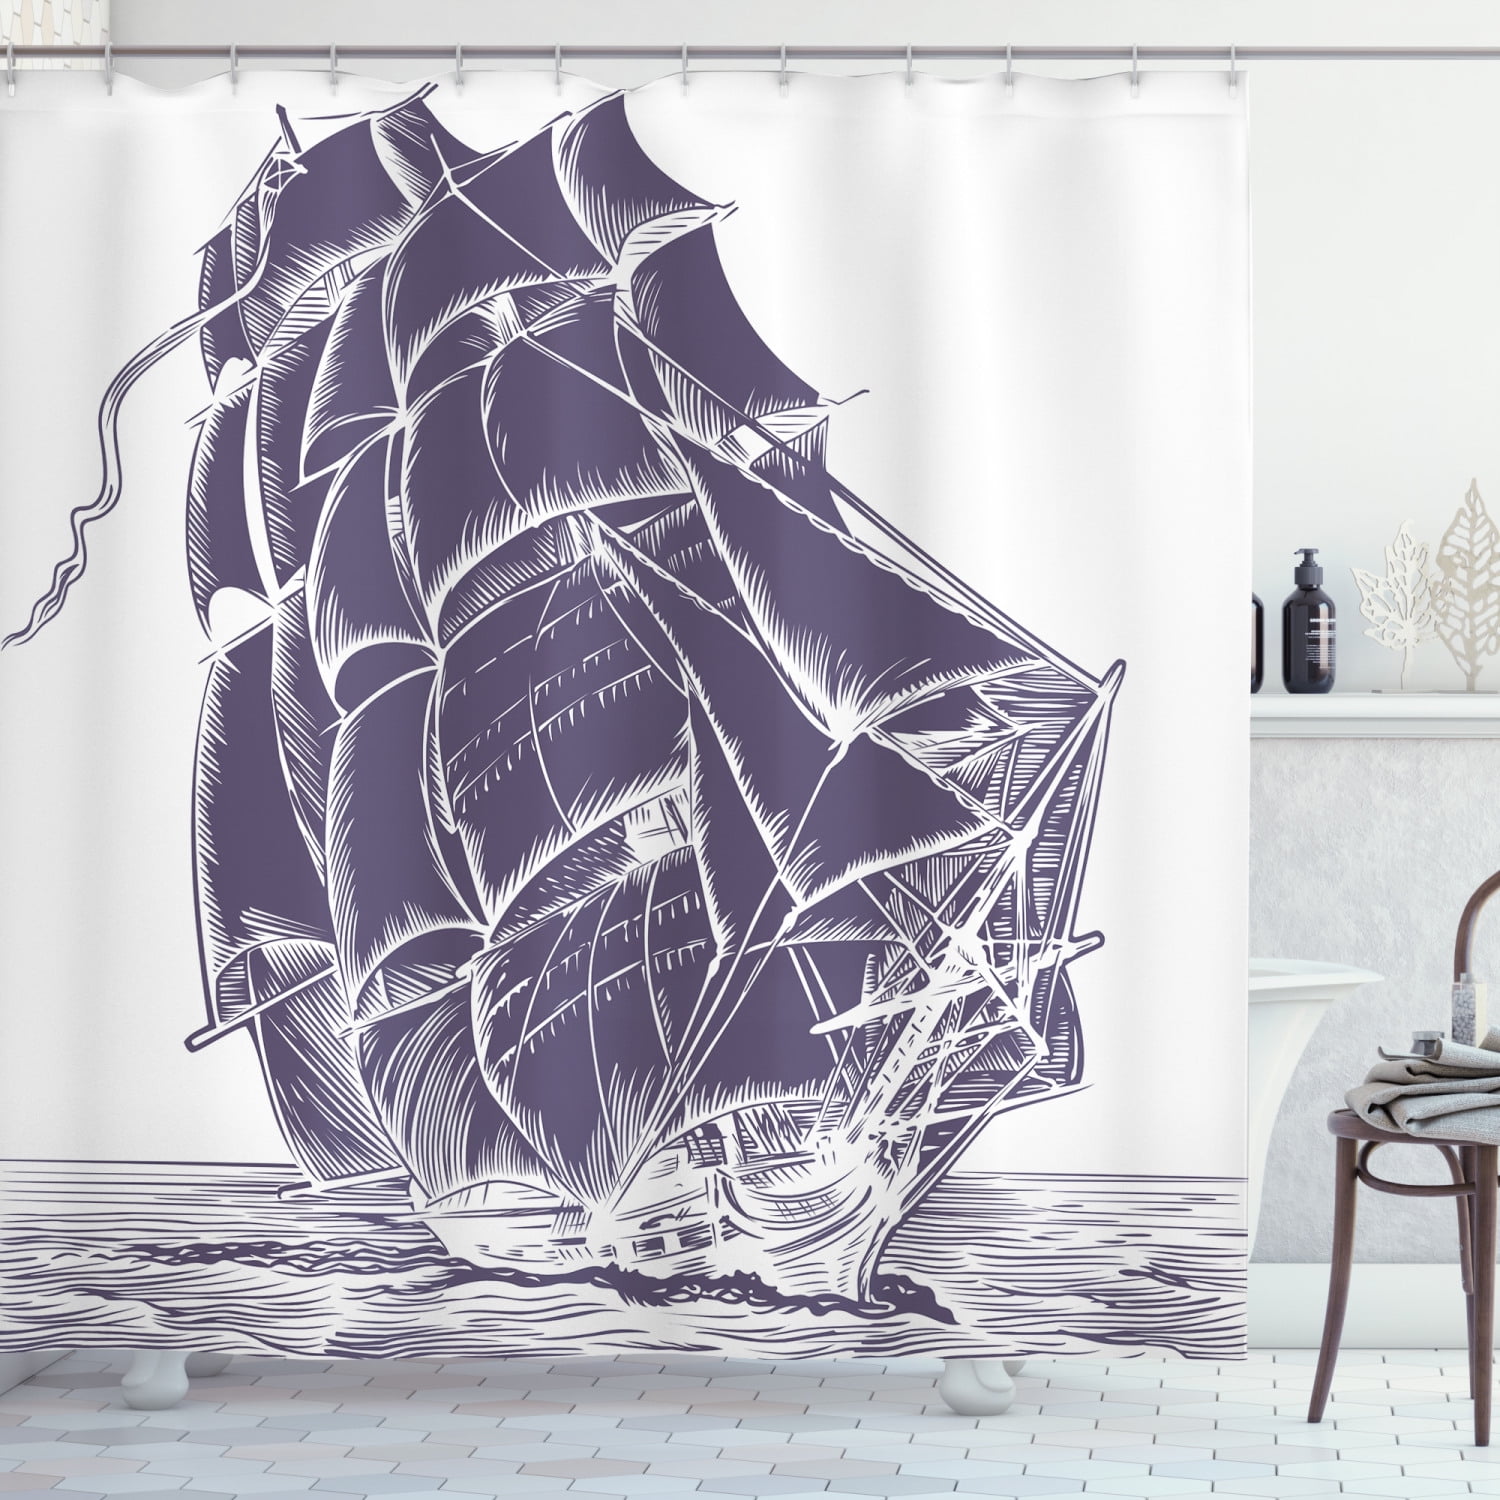 Shower Curtain Creative Bath SAILING BLUE RED WHITE SAILBOAT COTTON 72 by 72 NEW 